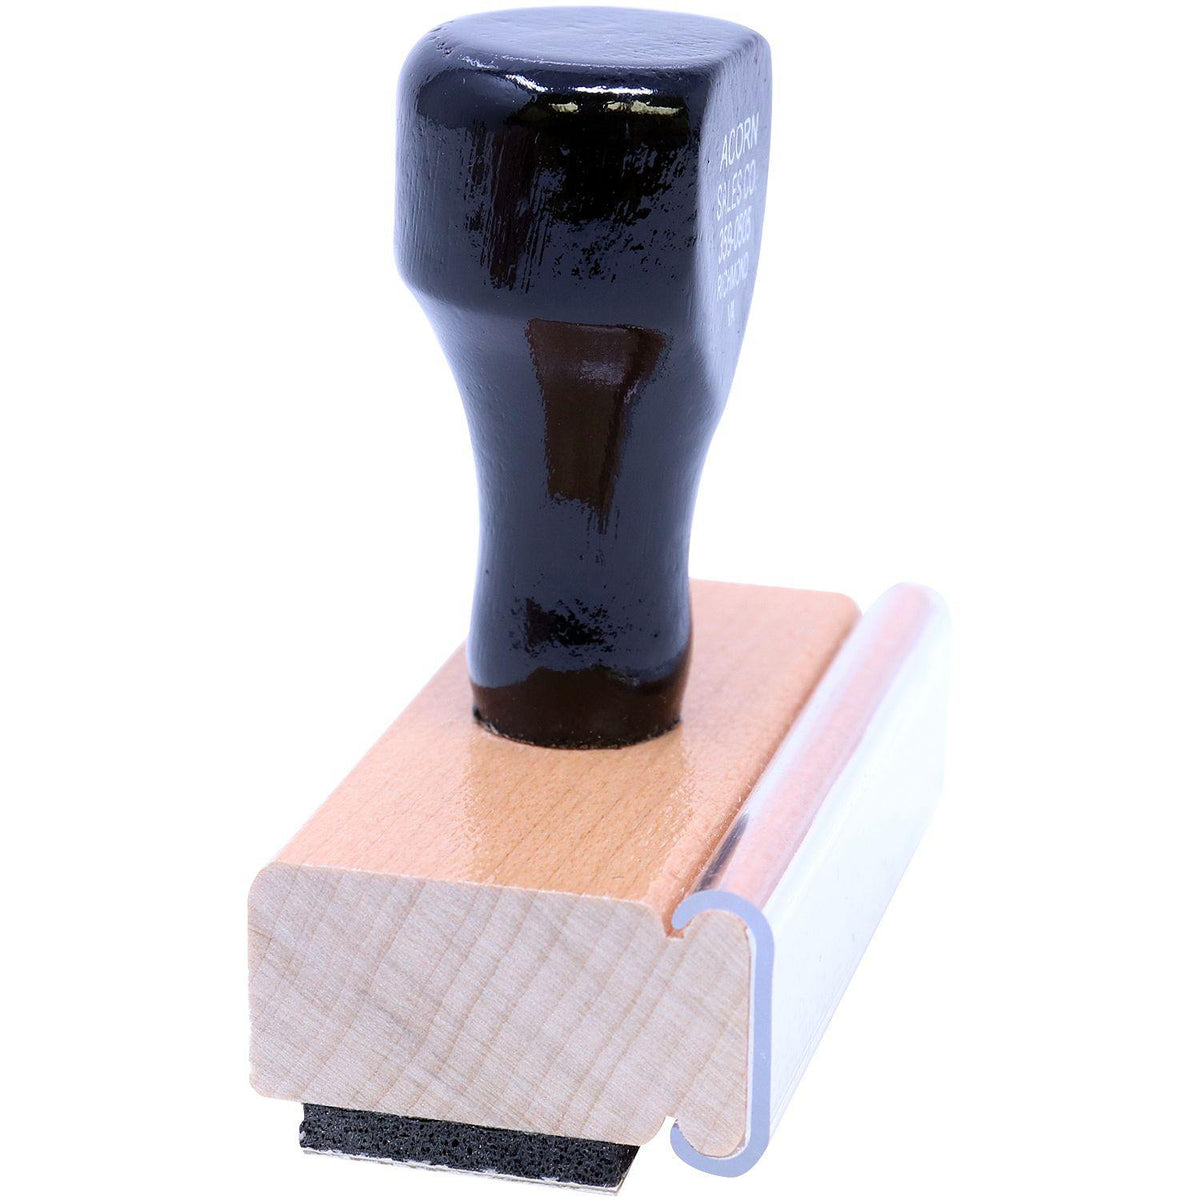 Side View of Large Returned Item Rubber Stamp at an Angle